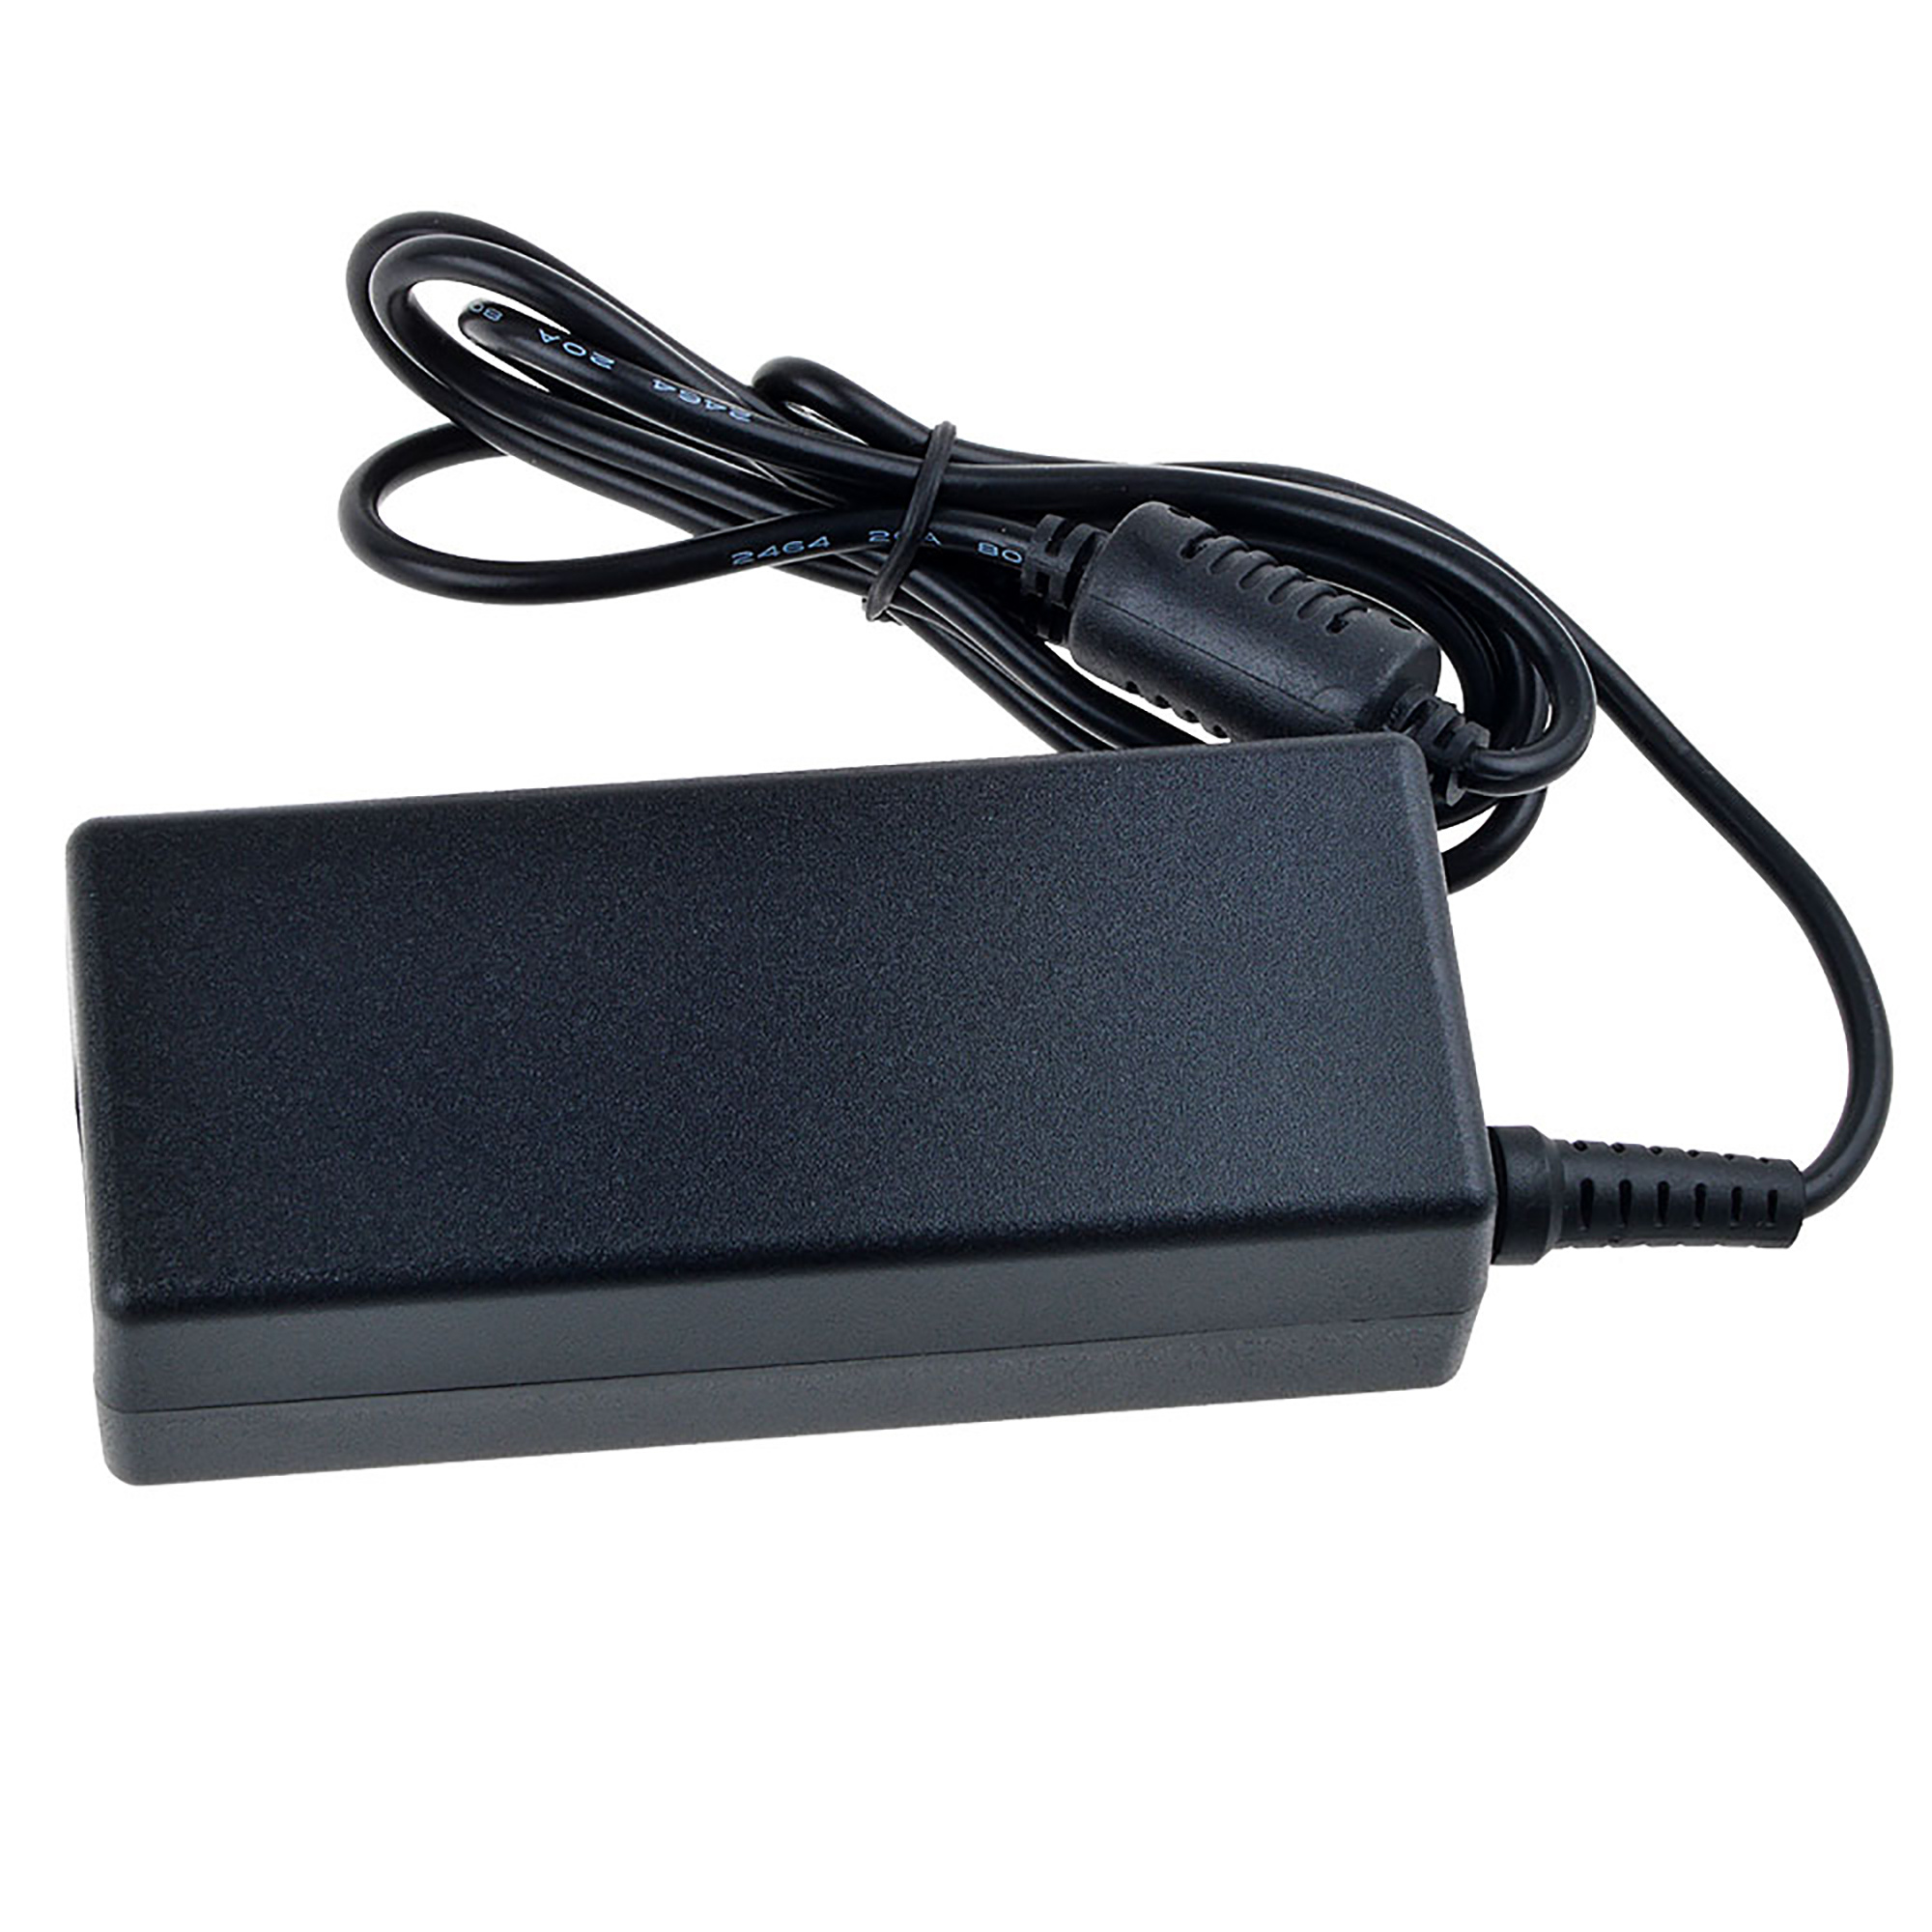 PKPOWER 16V 2.5A AC DC Adapter for ScanSnap SV600 FI-SV600 FI-SV600A FI-SV600A-P PA03641-B305 fi-7030 PA03750-B005 PA03750-B001 N7100 PA03706-B205 Scanner, FMC-AC313S Power Supply - image 2 of 5